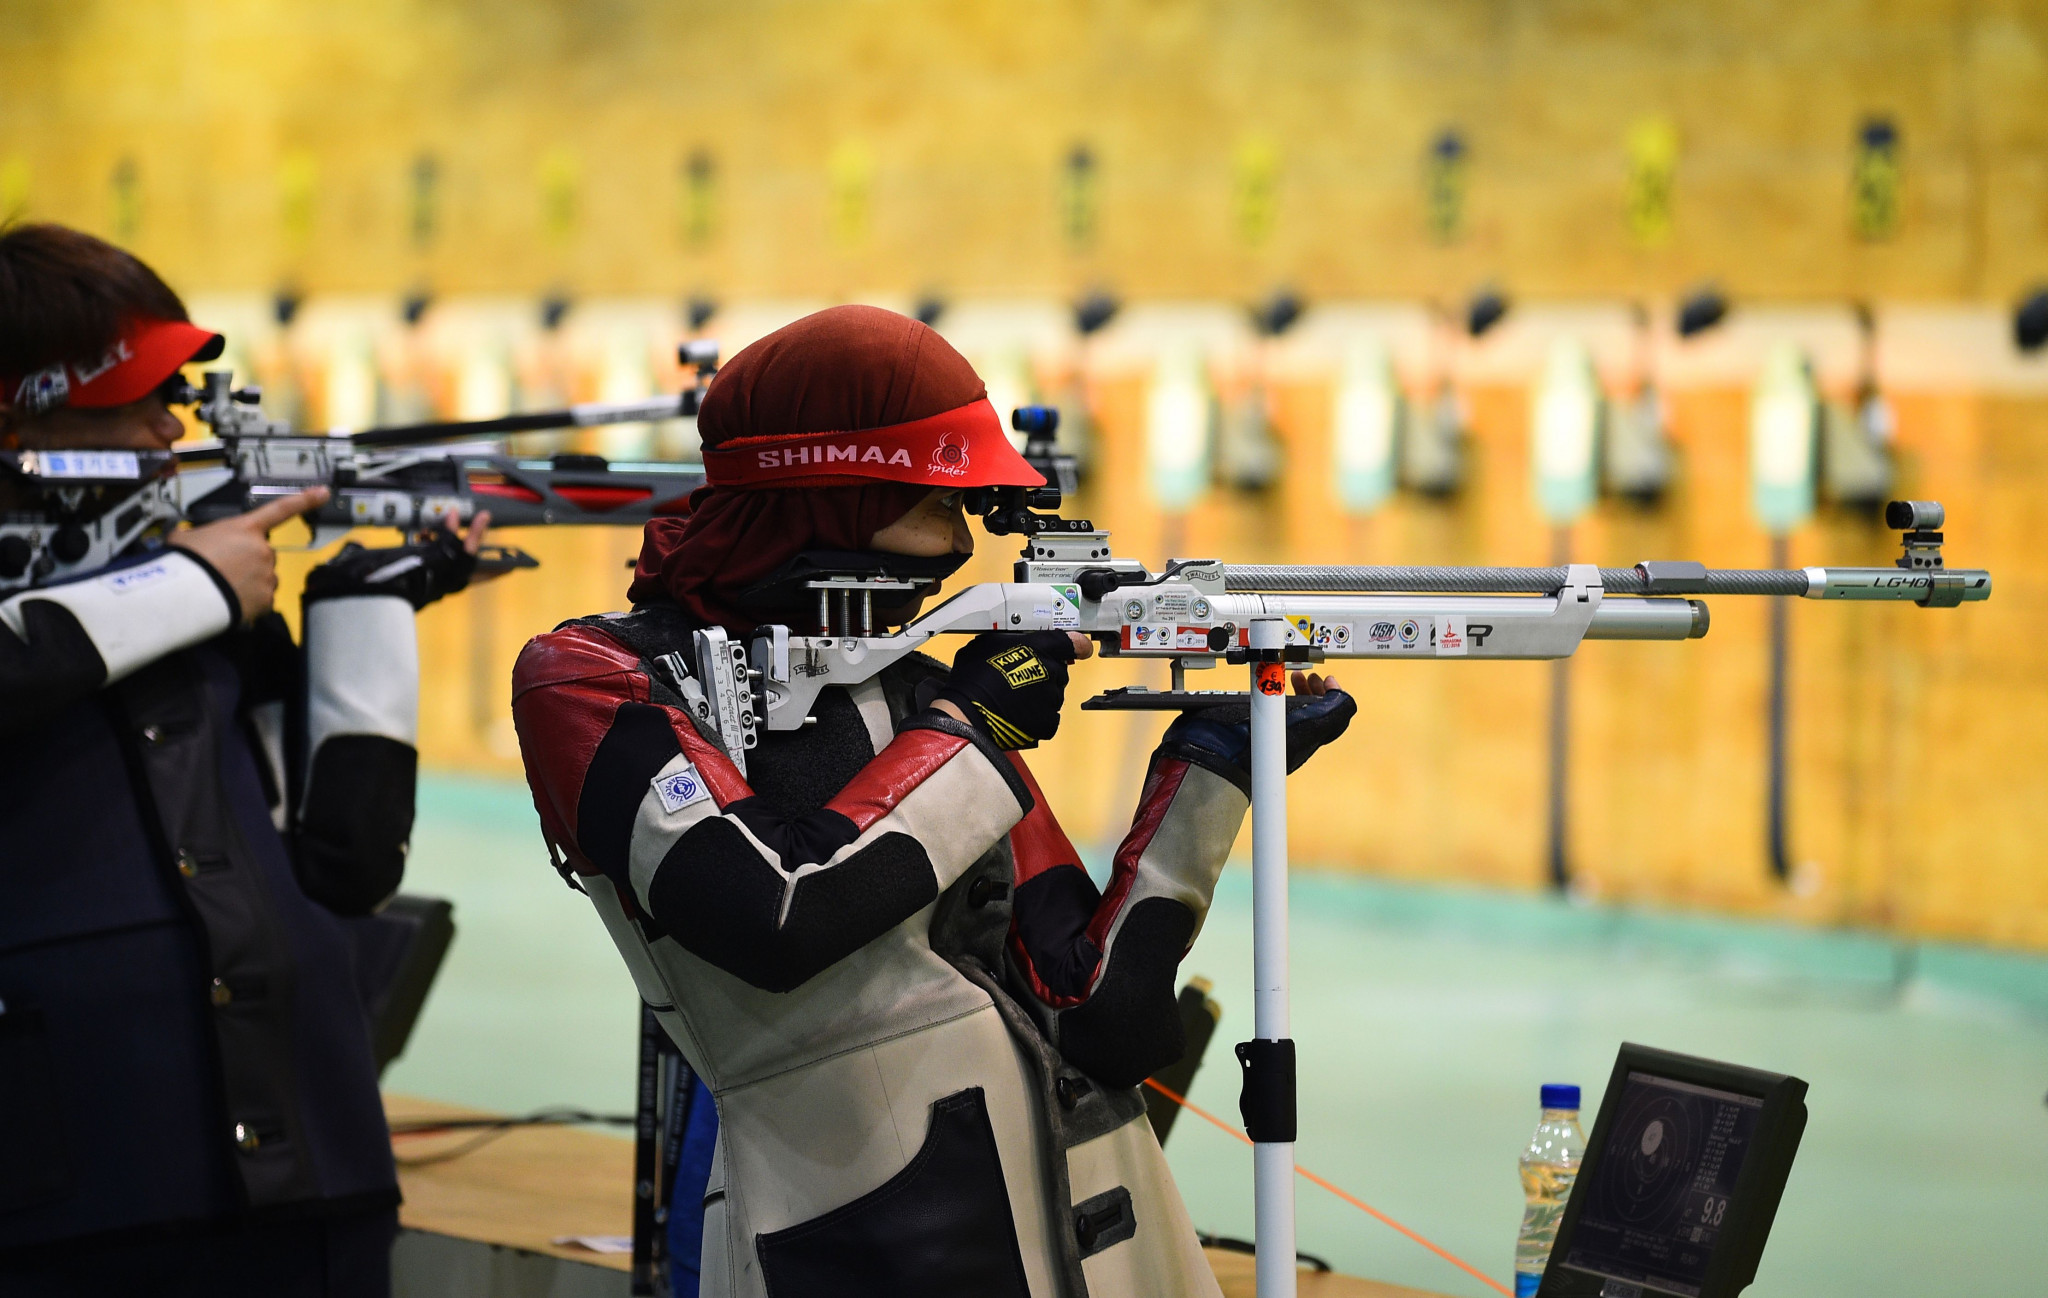 Competition at the ISSF World Cup is due to start on Saturday and will last for seven days until February 27 ©Getty Images